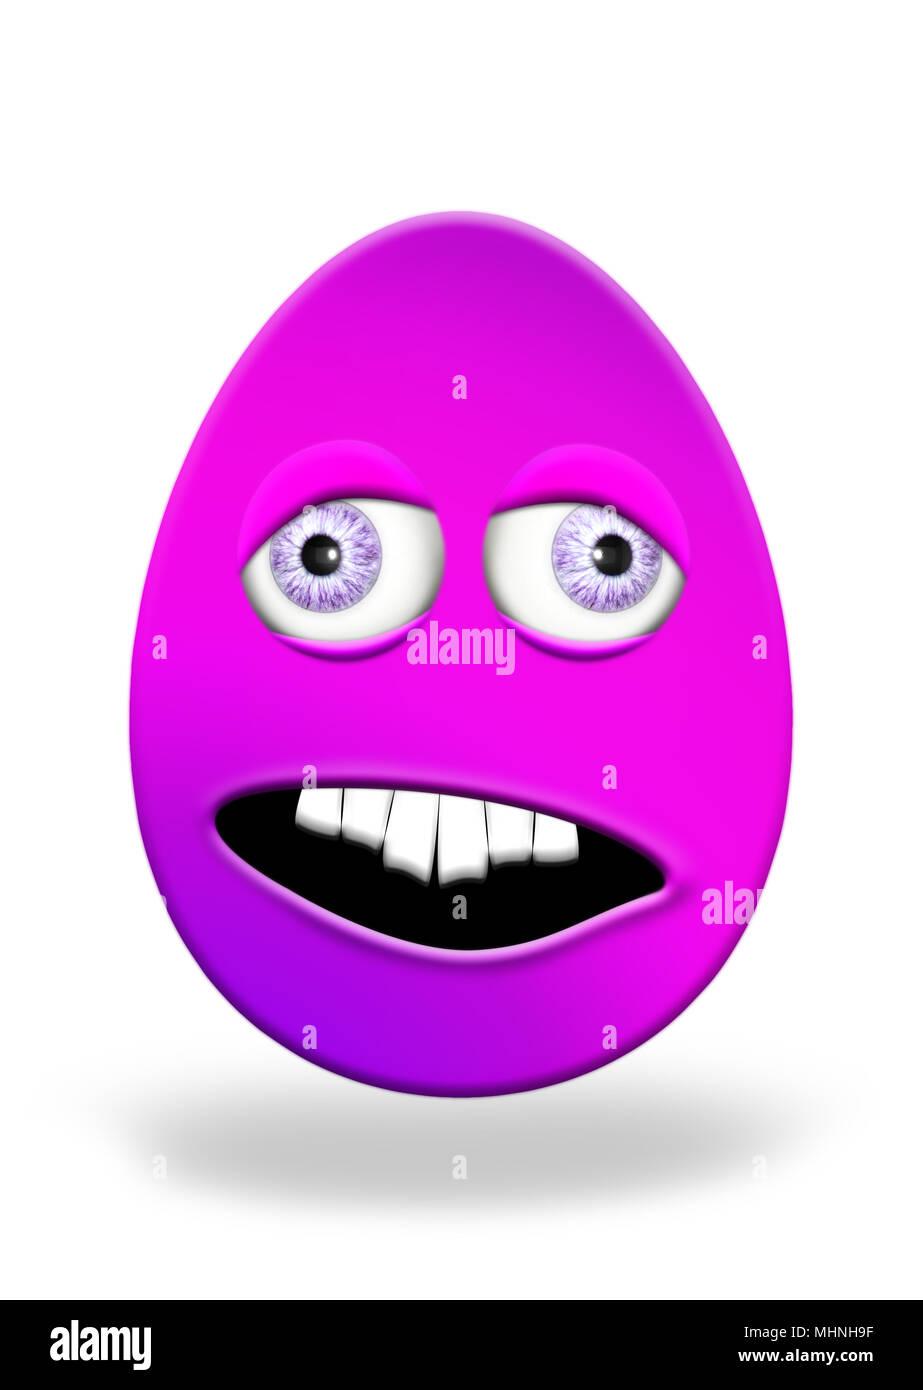 Easter Egg With Eyes and Mouth Looking Stupid and Scared 3D Illustration Stock Photo